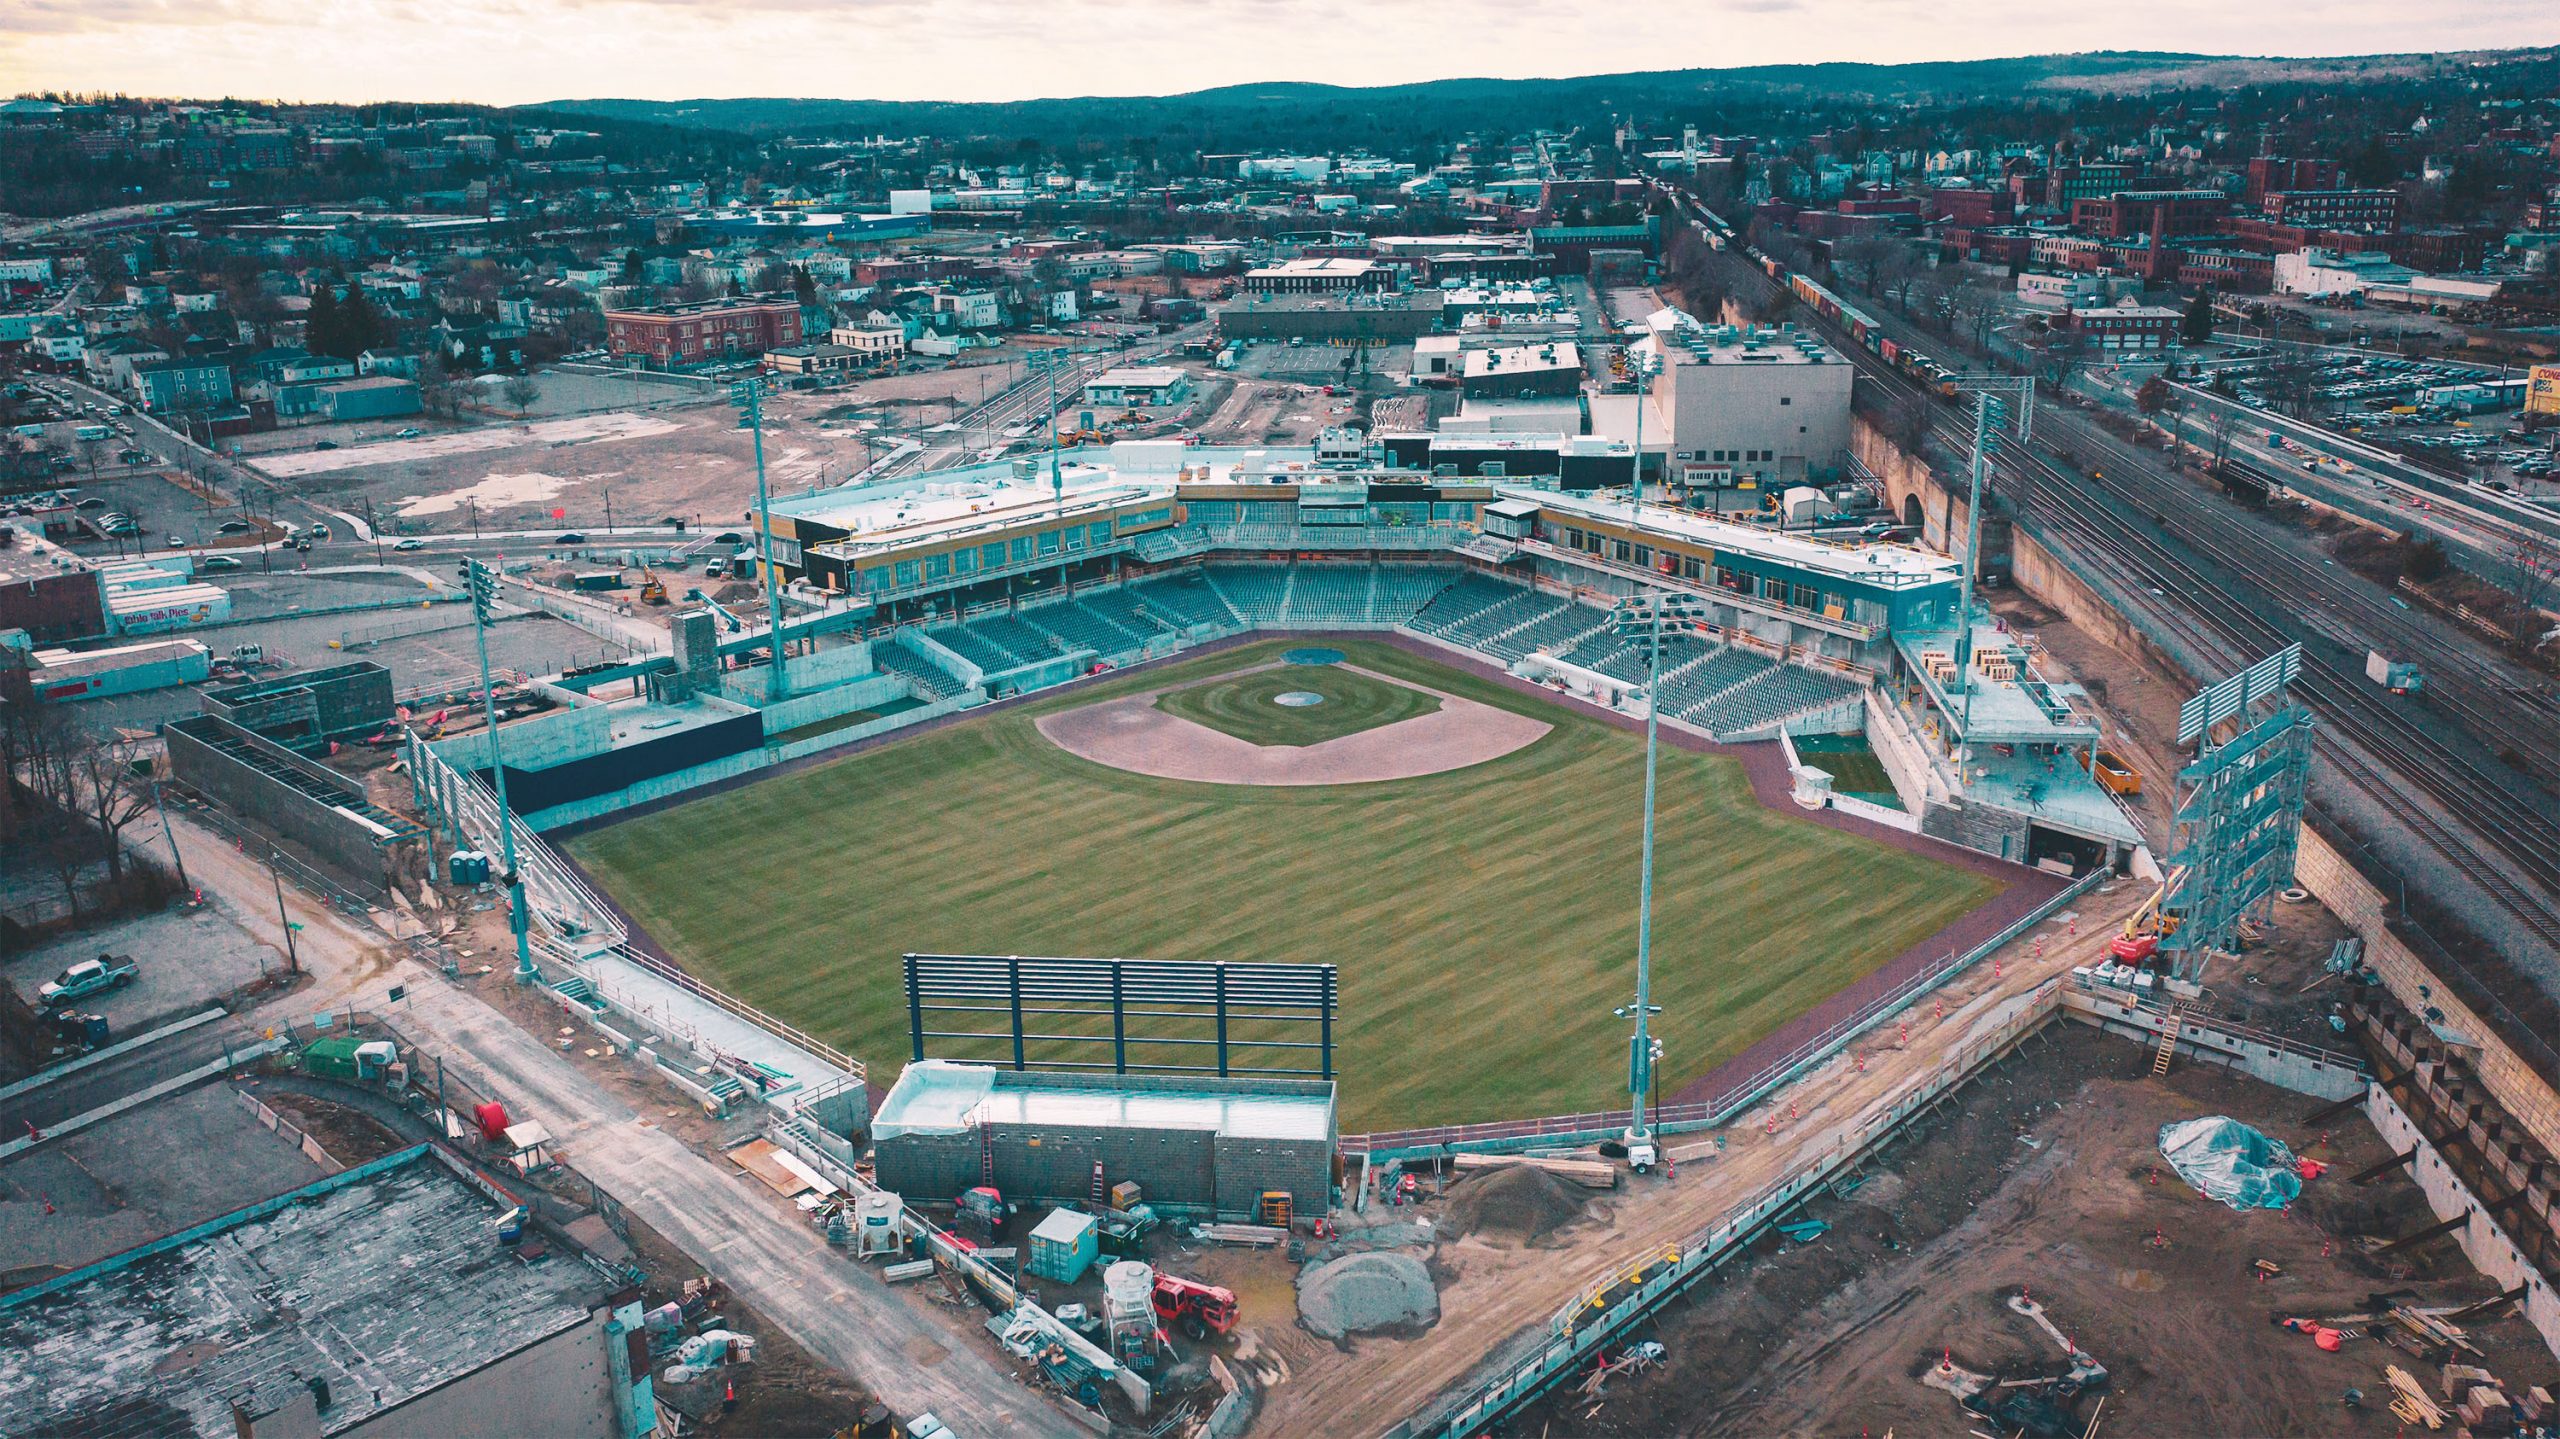 Polar Park wrapping up construction as first WooSox game nears